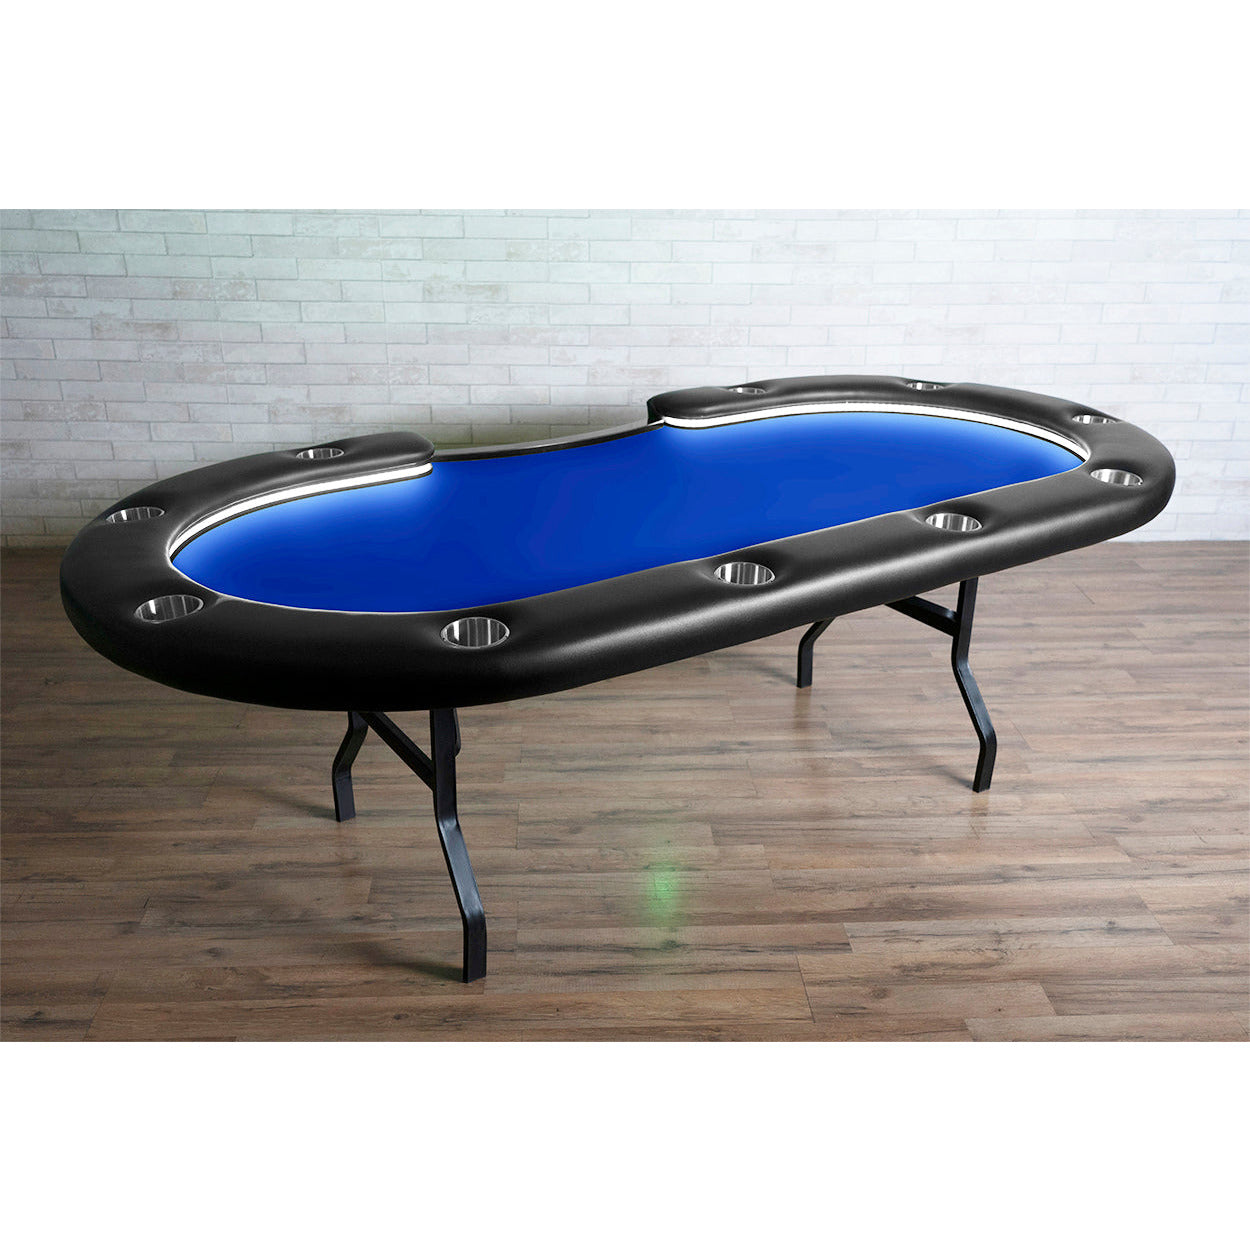 BBO The Aces Pro Alpha Folding Poker Table blue angle view 